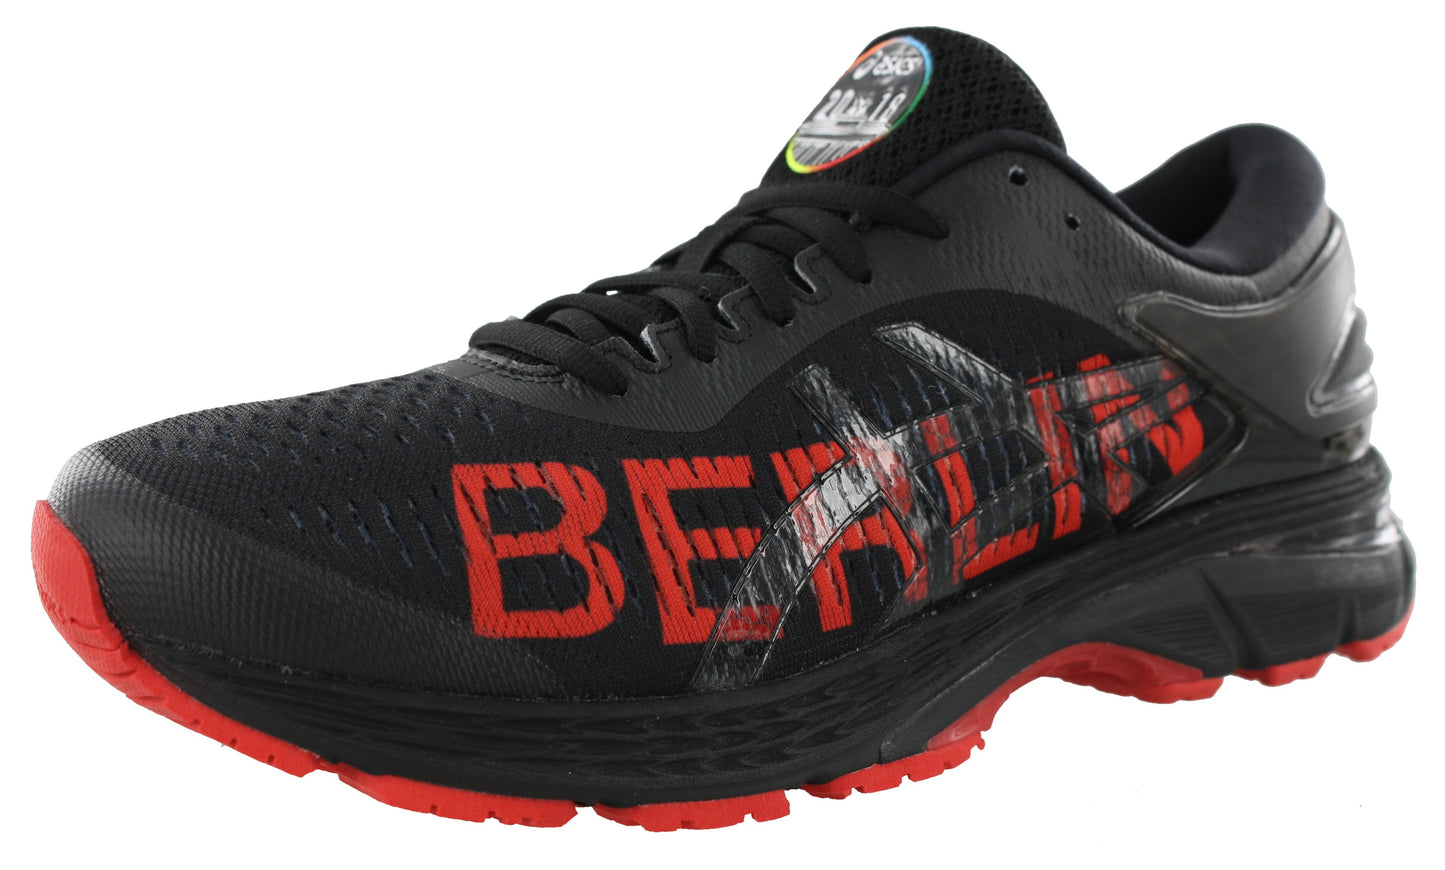 Lateral of Berlin Black/Classic Red ASICS Kayano 25 Berlin Men's Light Running Shoes